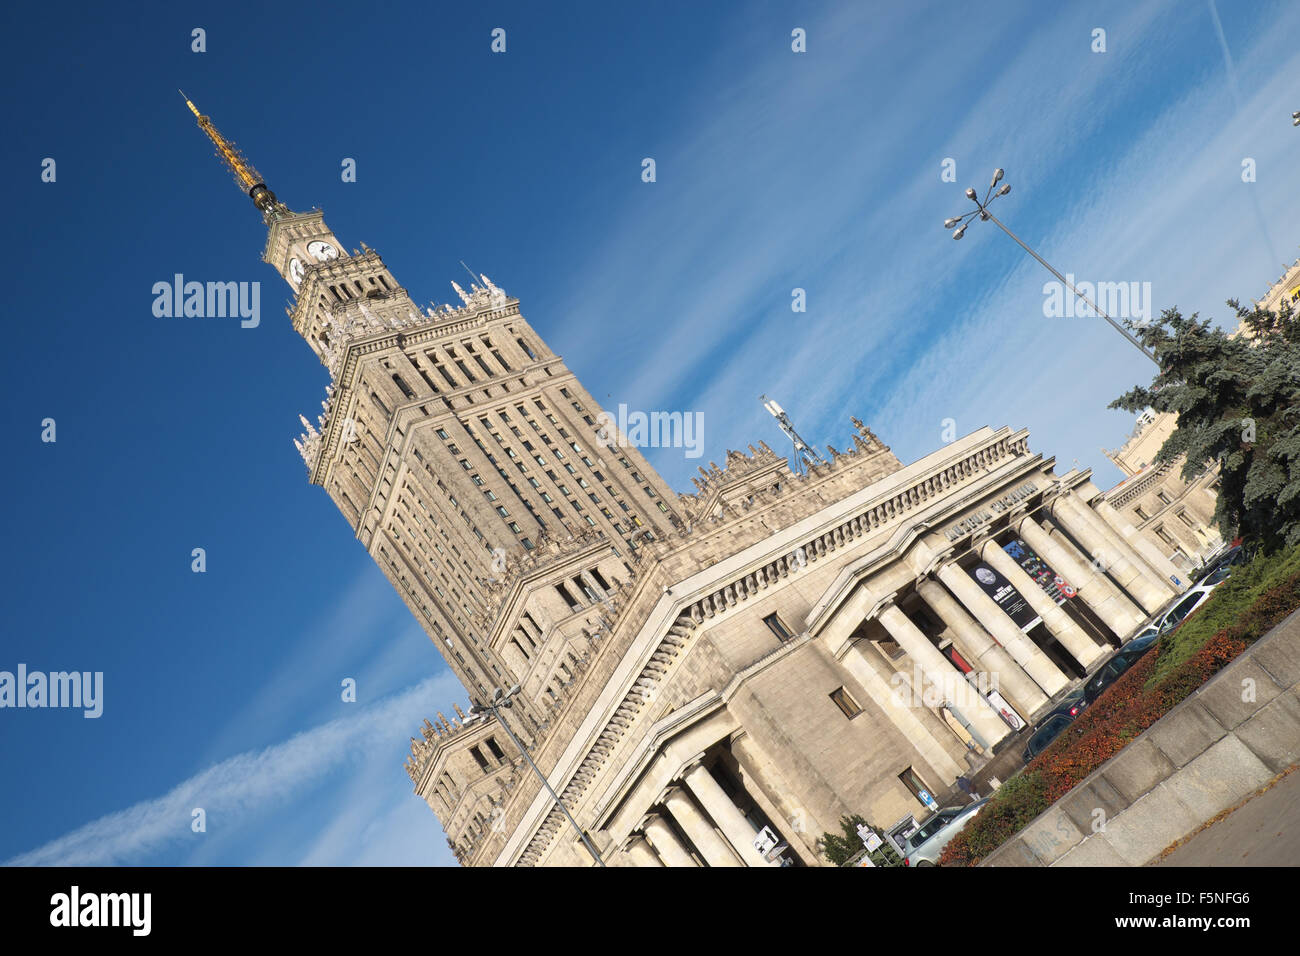 Warsaw Poland The Palace of Culture and Science PKiN in the city centre Stock Photo